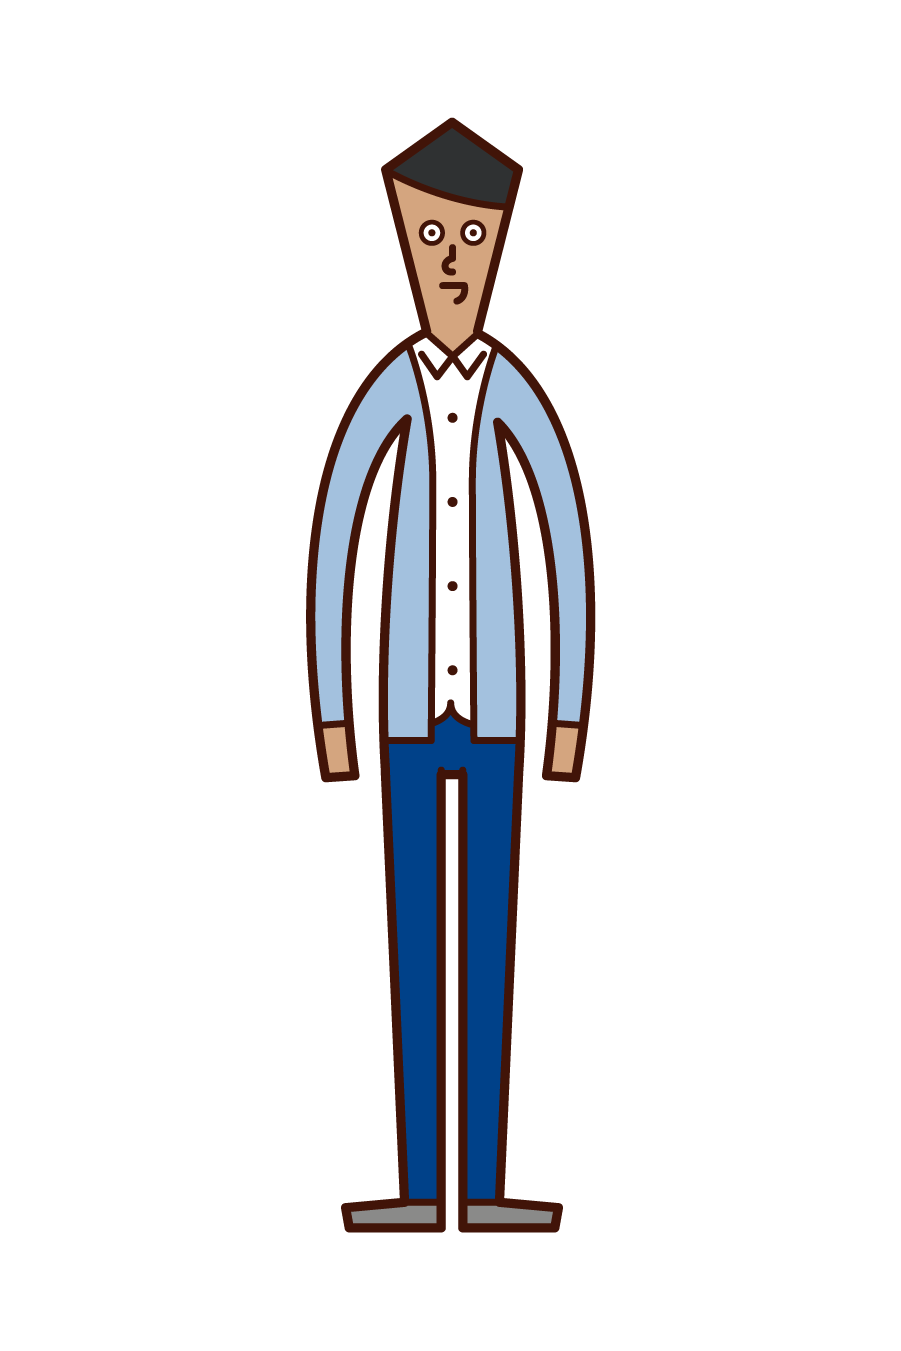 Illustration of a man wearing a cardigan